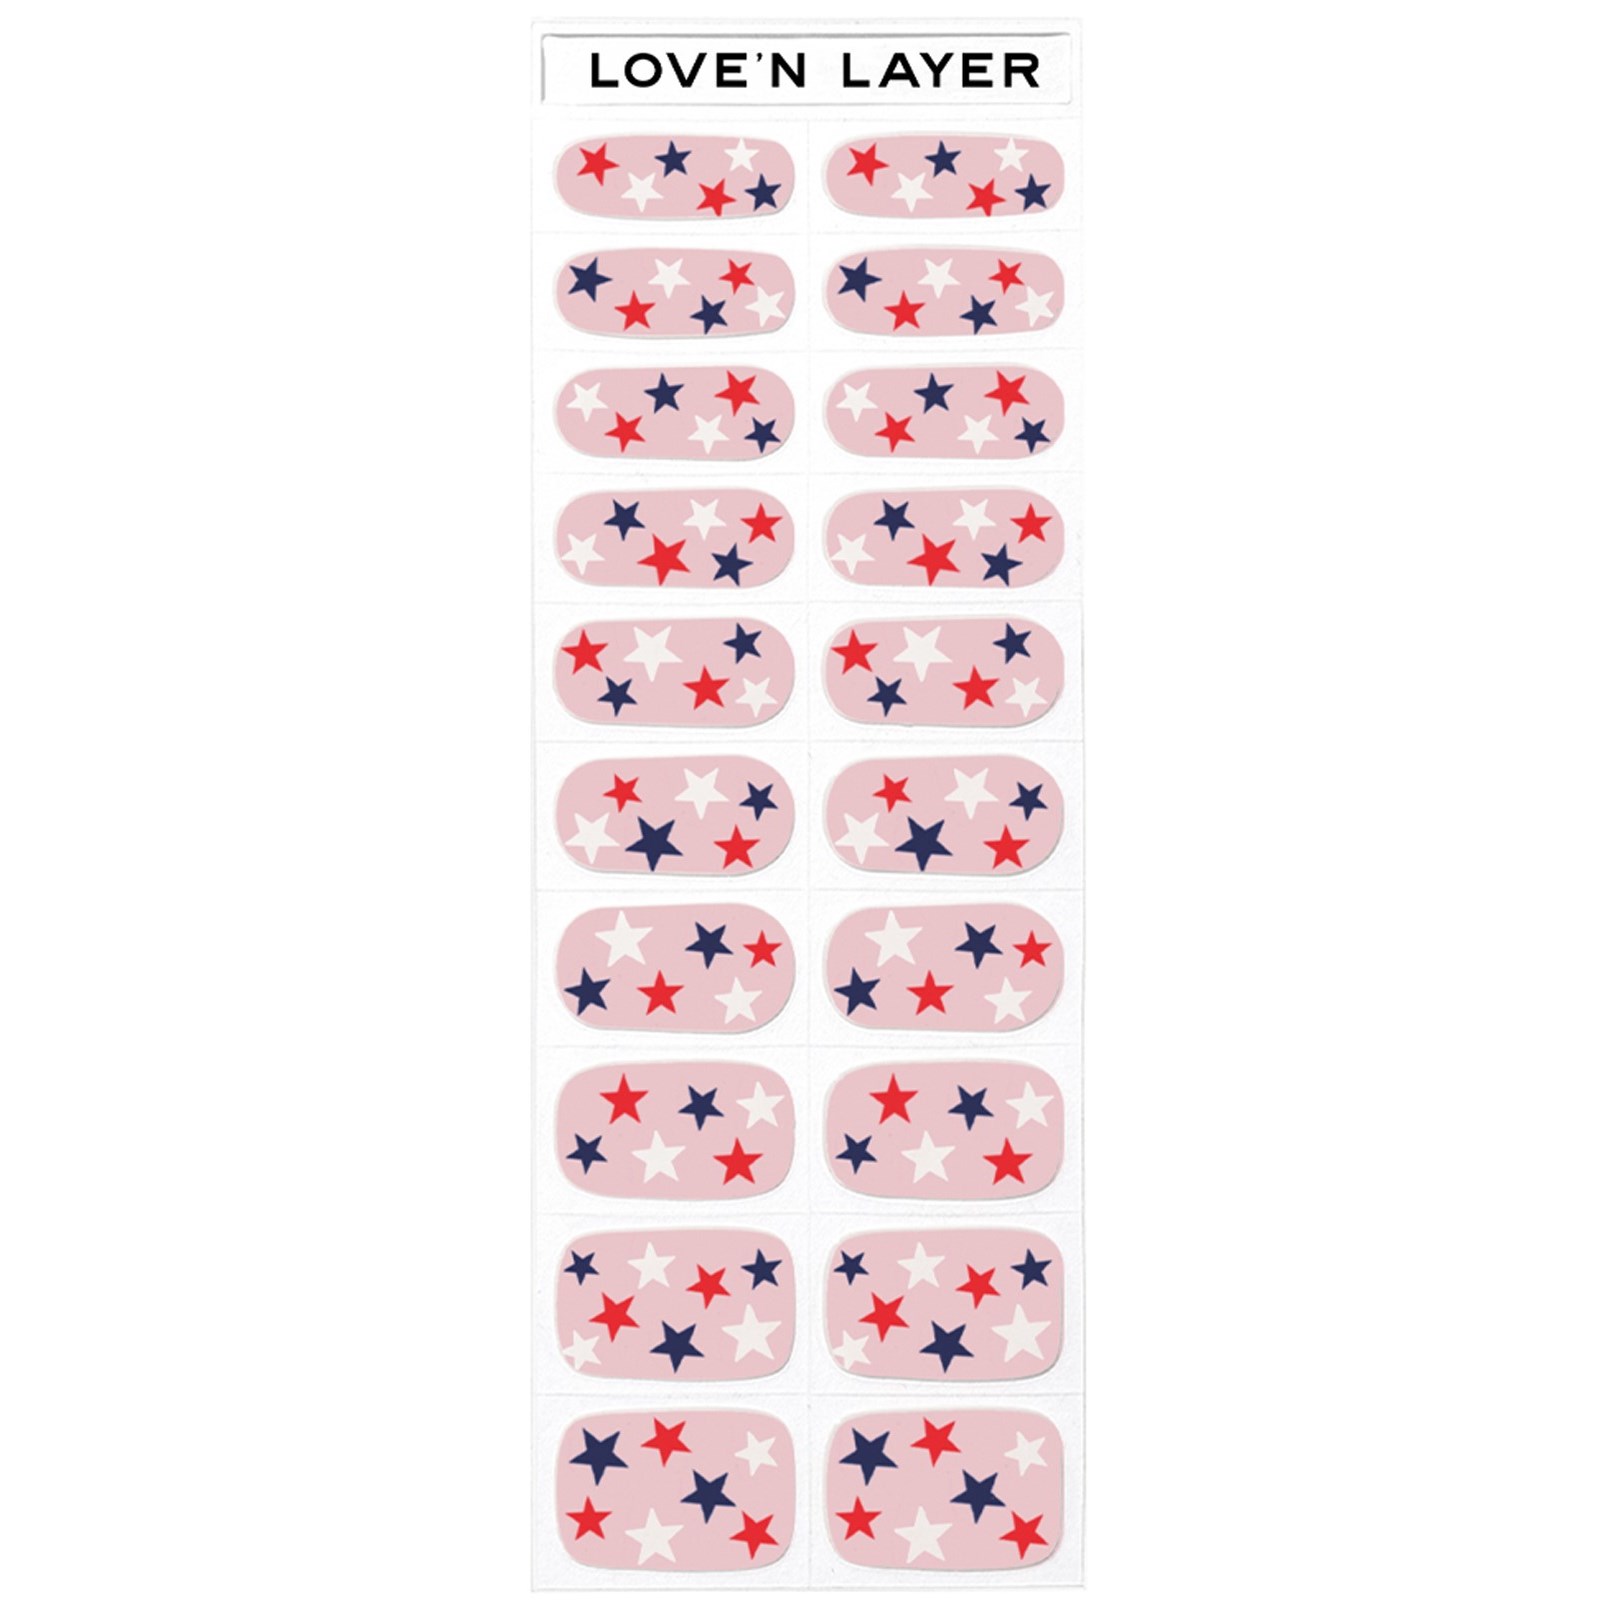 Loven Layer Norway 23 Norway Stars